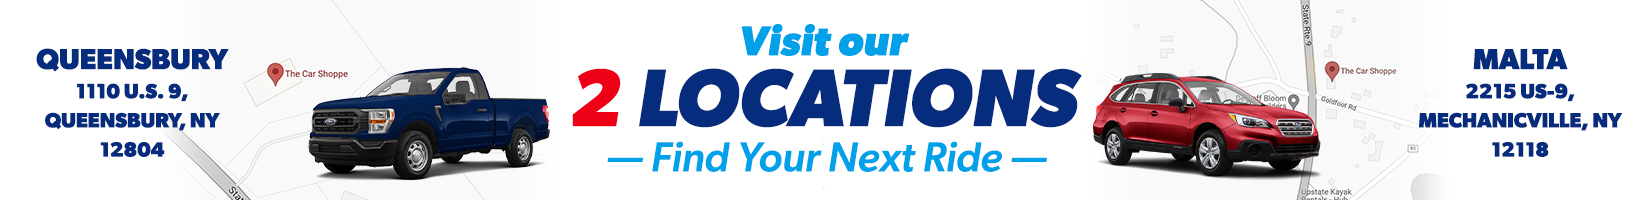 Visit our two locations!